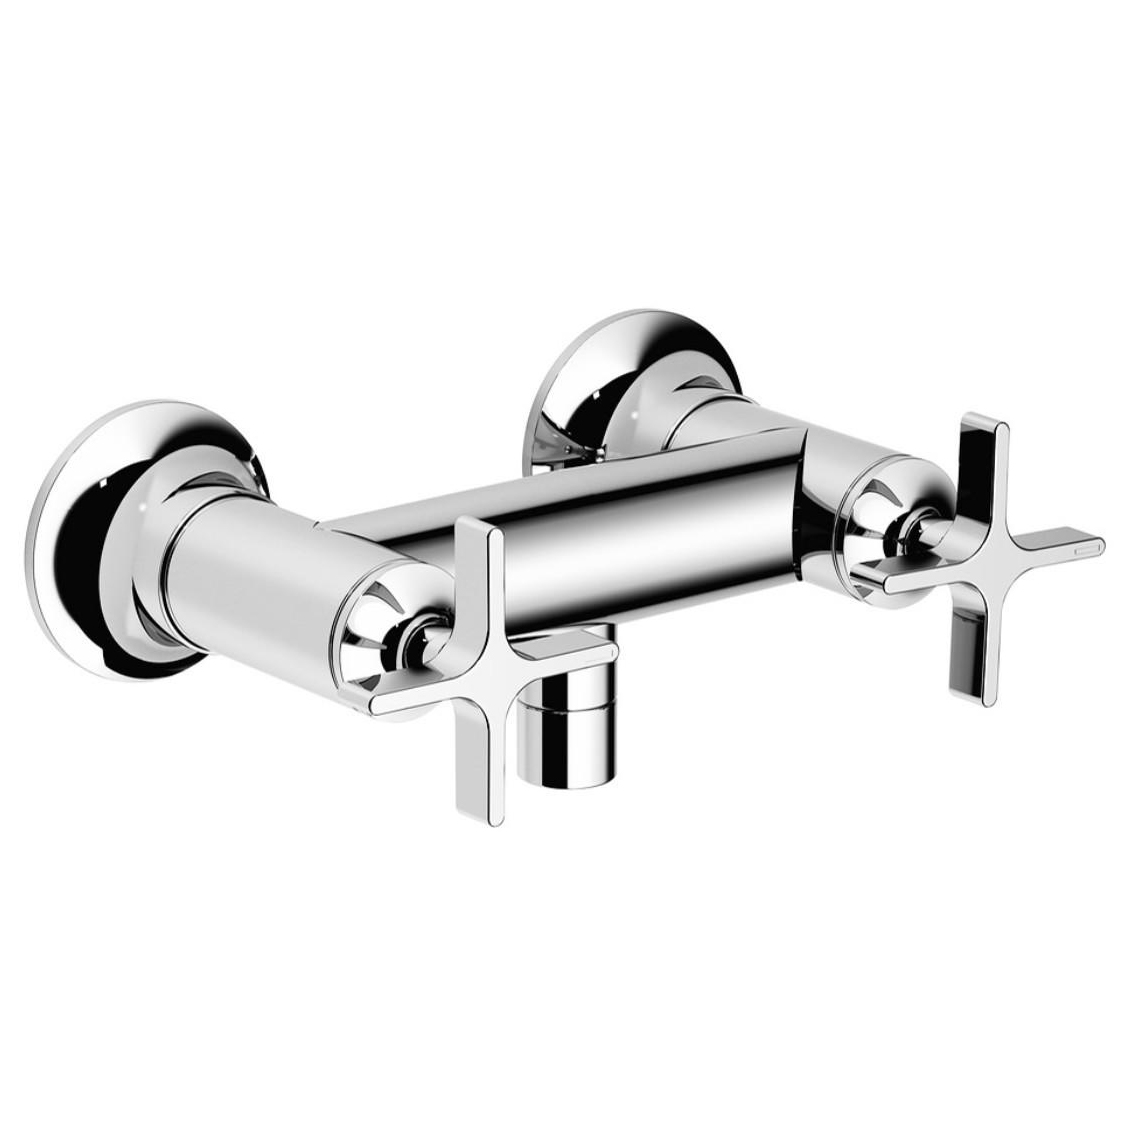 Vaia Shower Faucet Less Showerhead In Polished Chrome